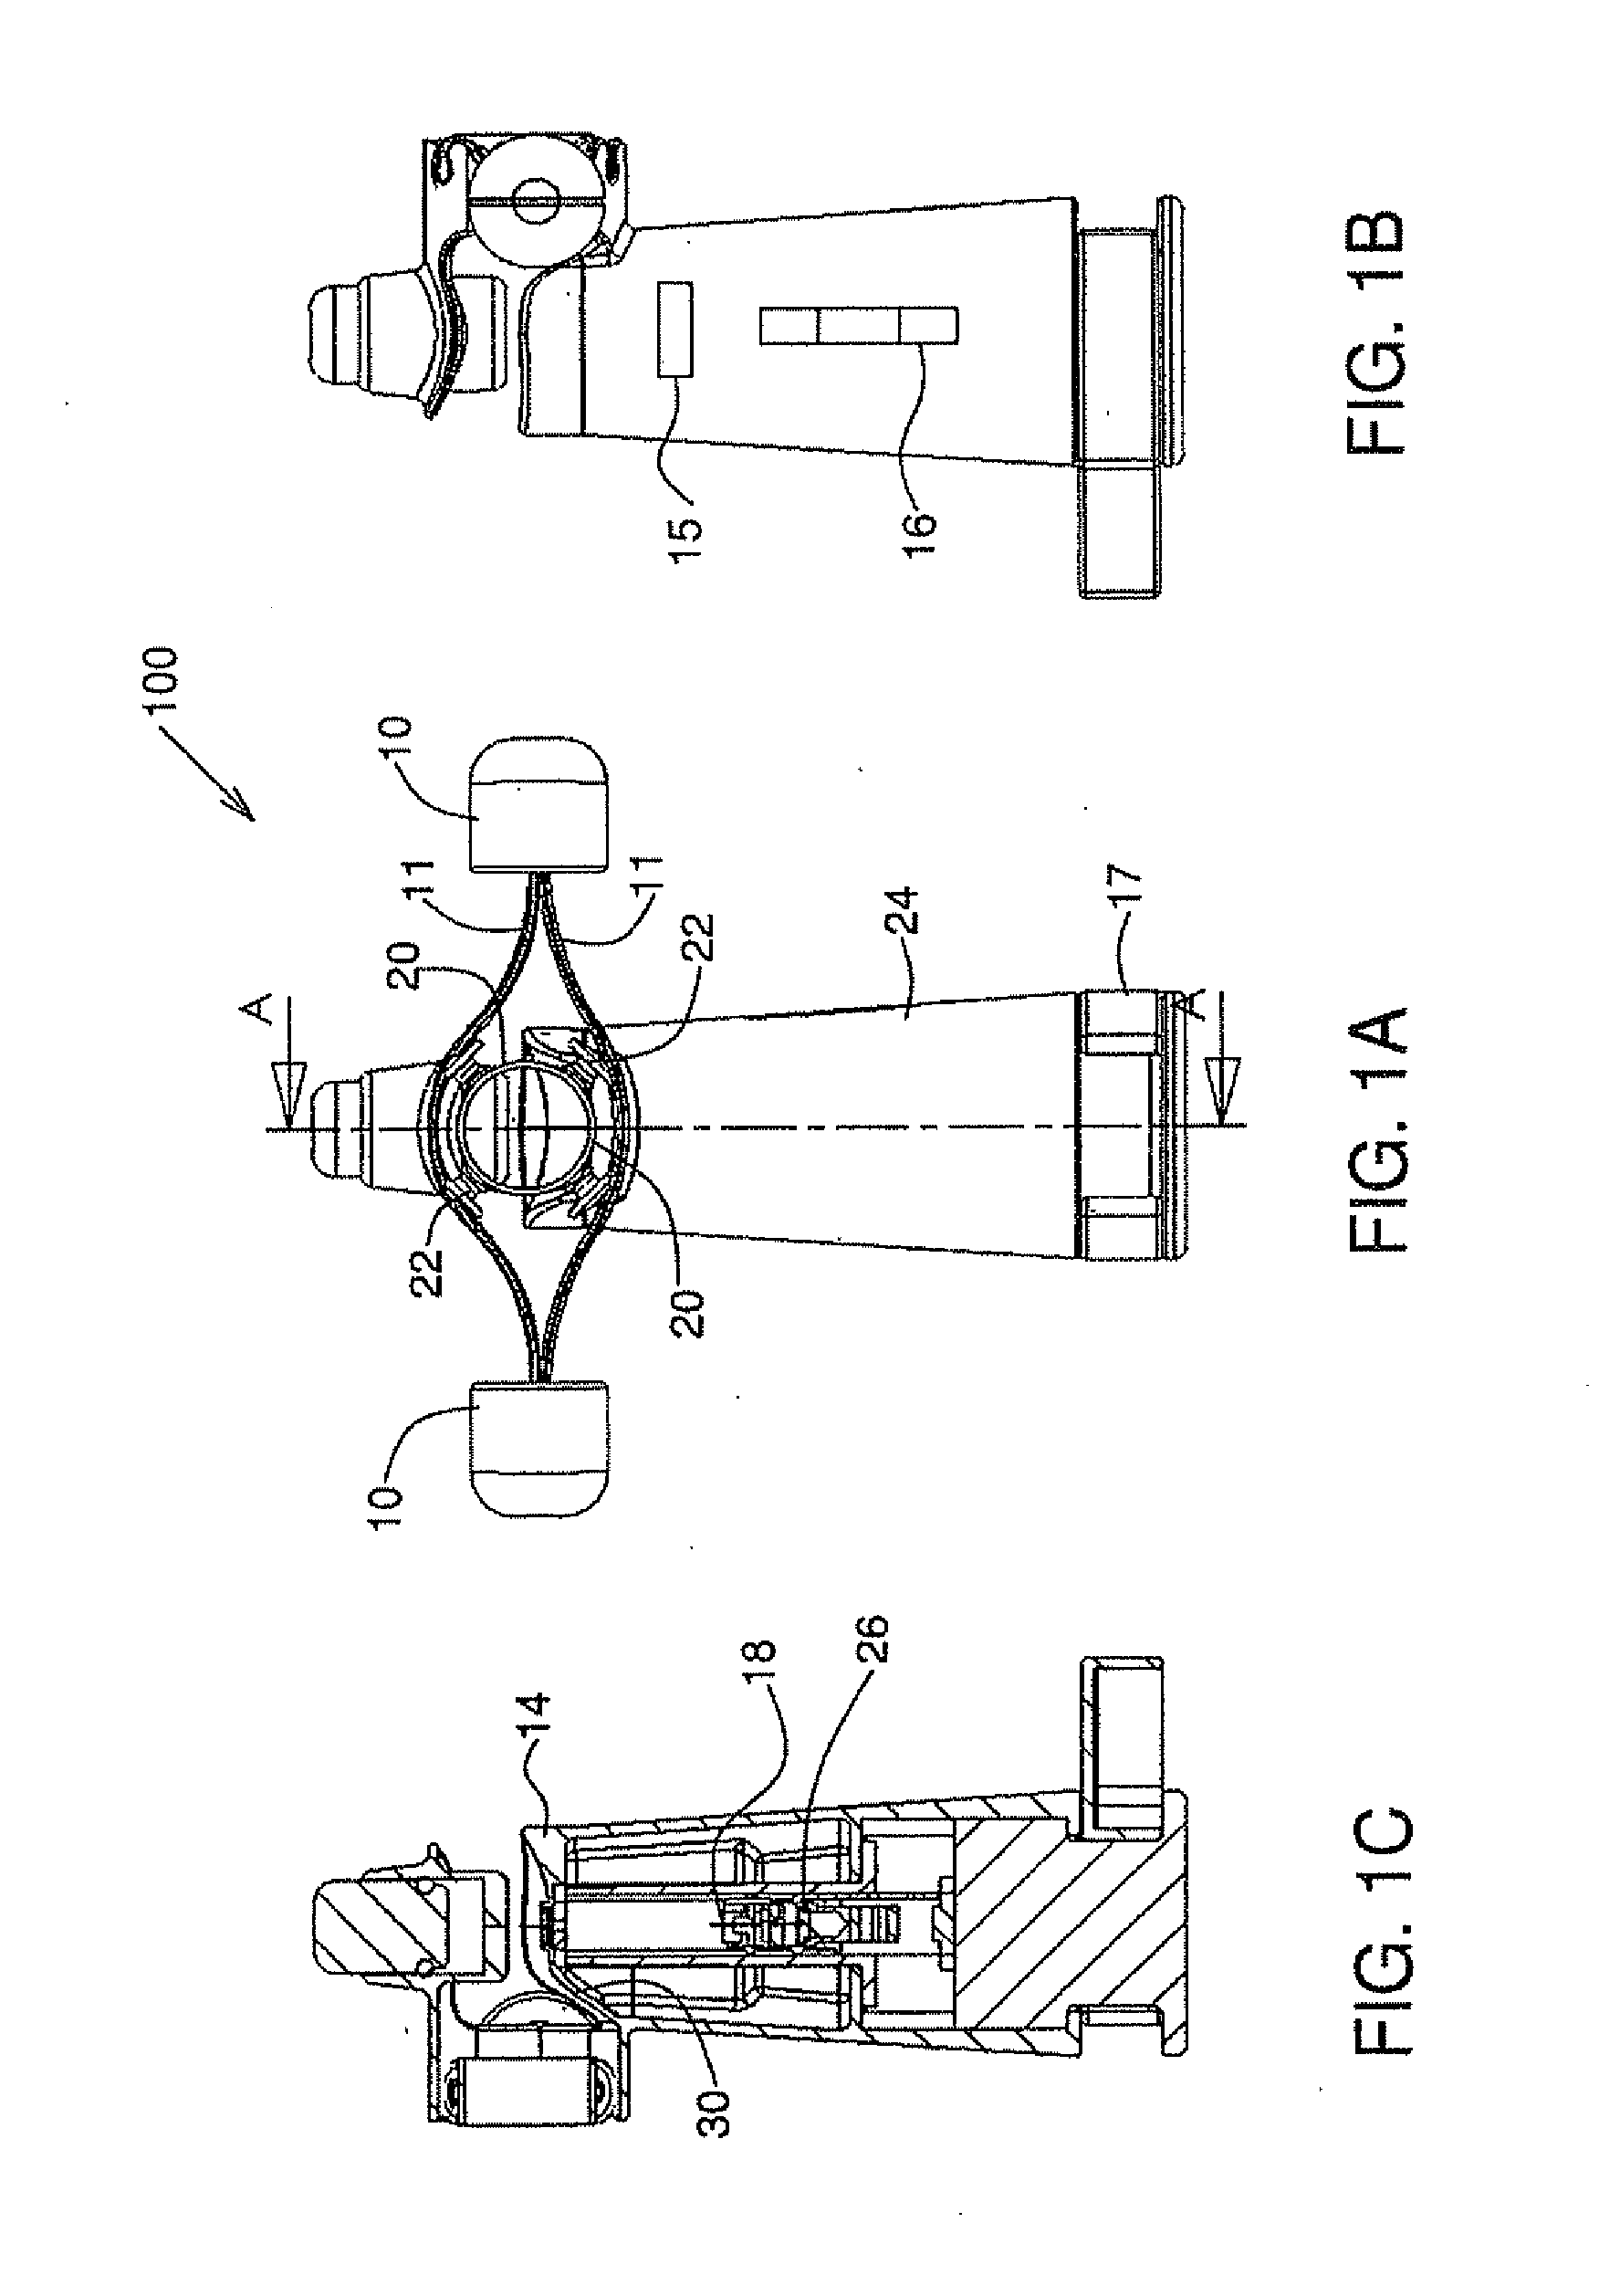 Devices and methods for reduced-pain blood sampling